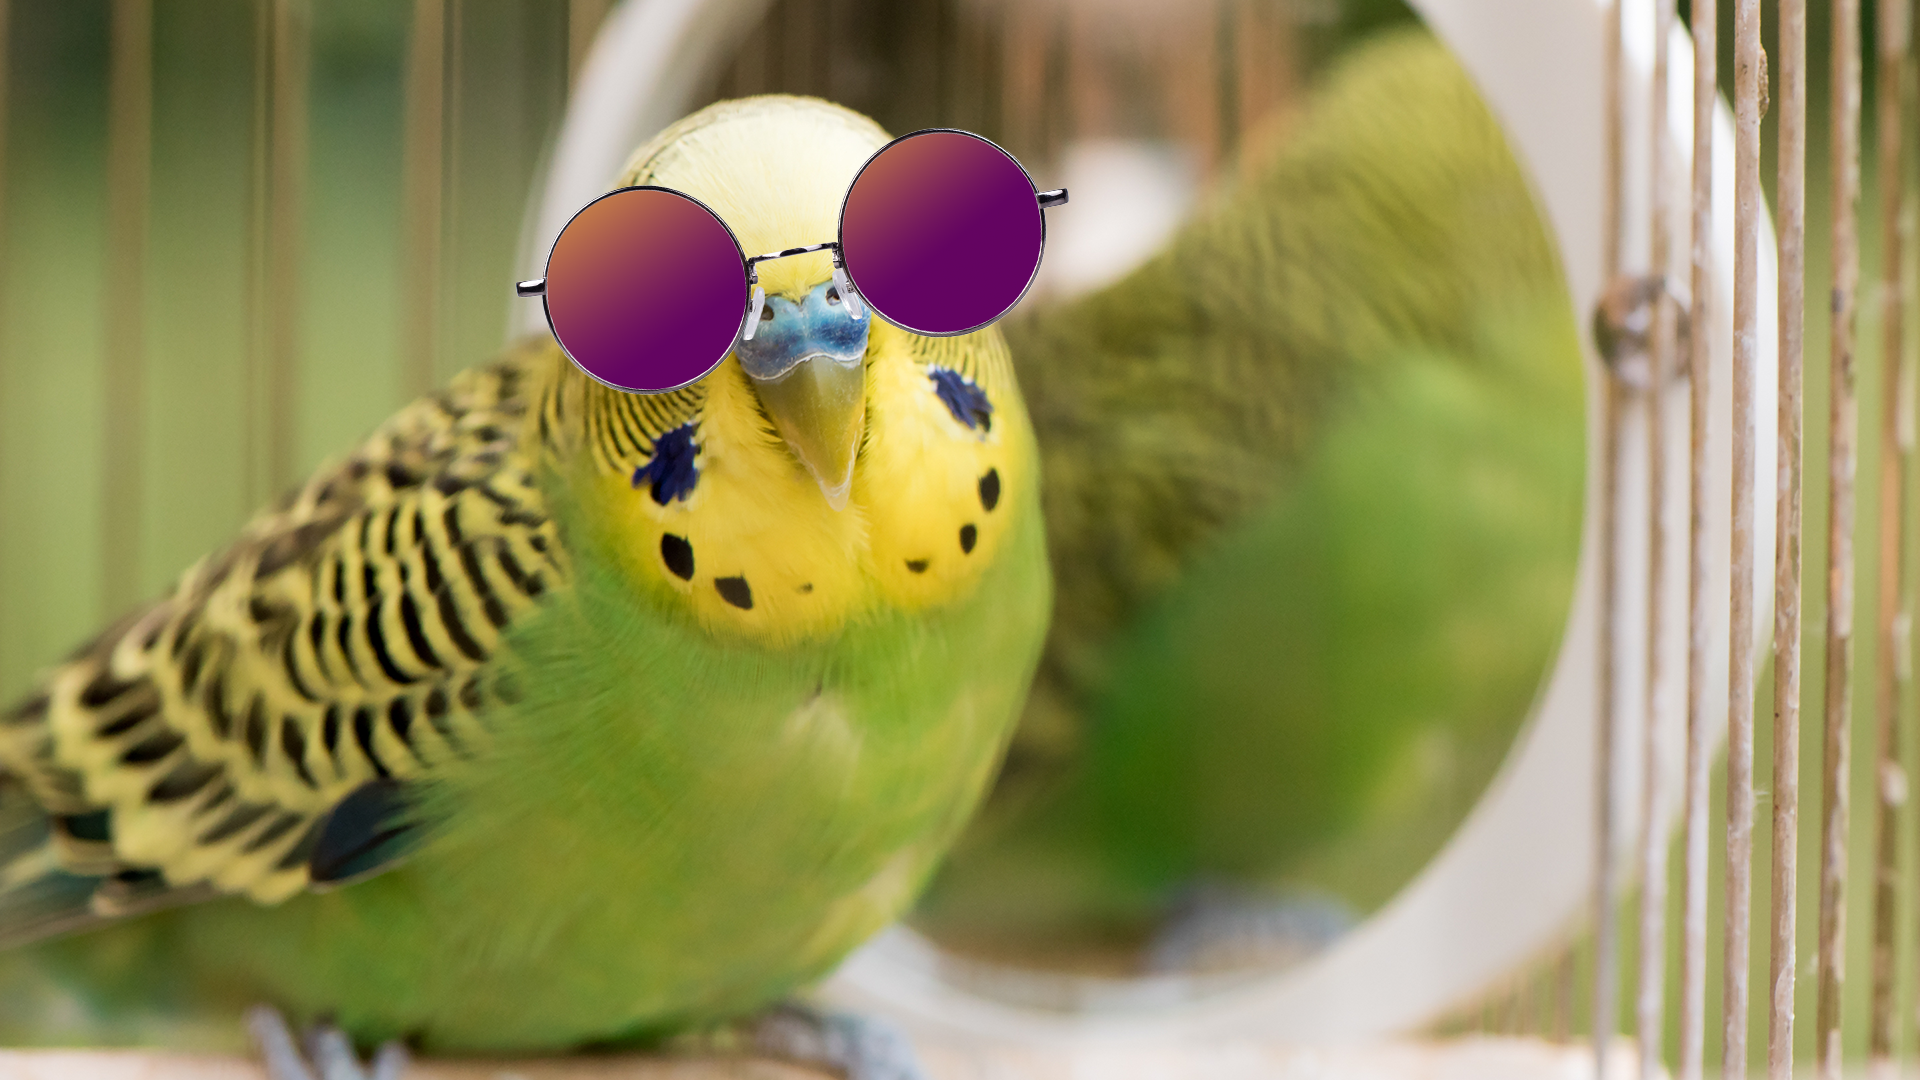 Cool looking budgie